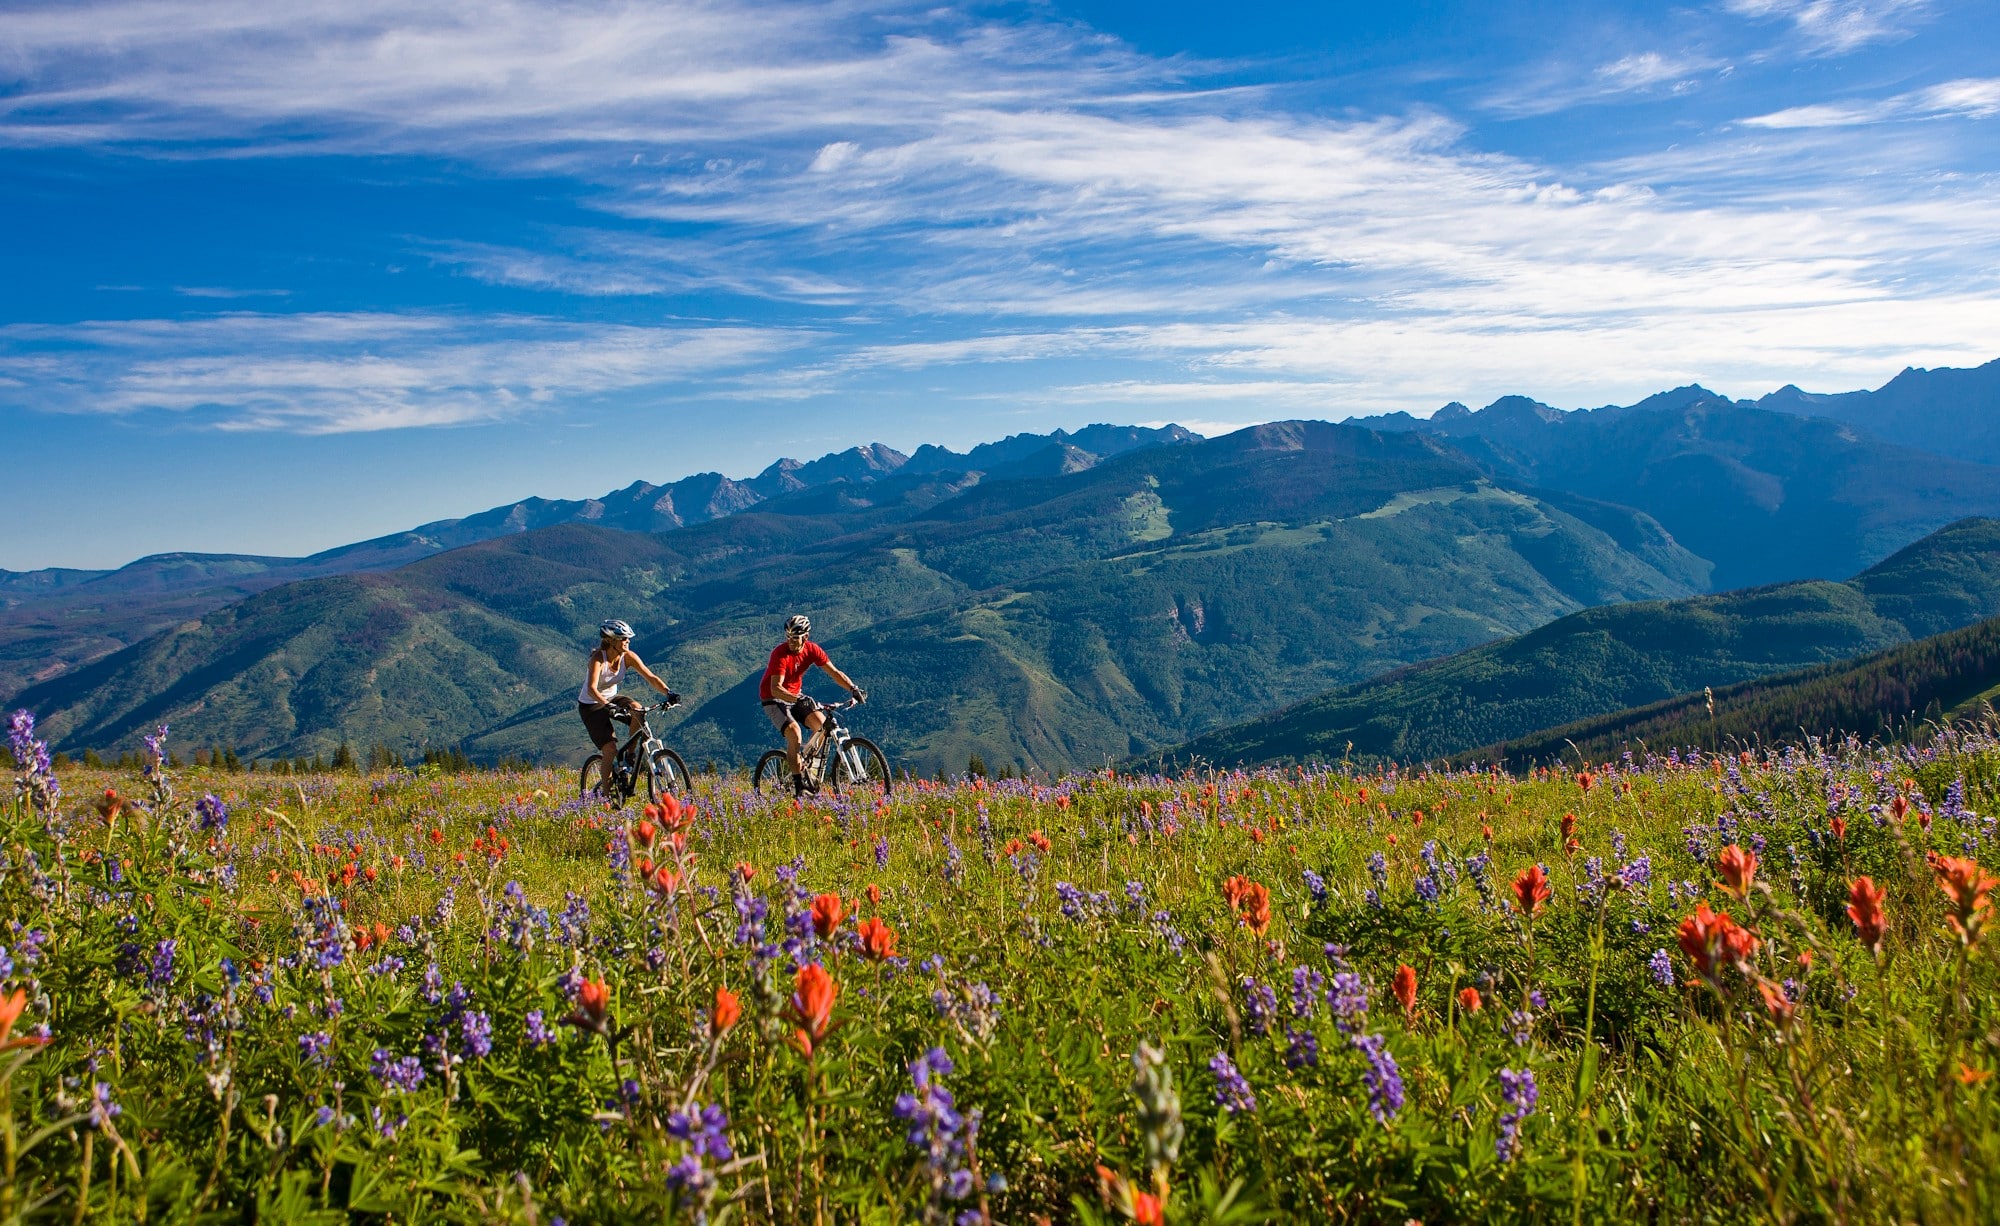 A couple mountain bikes on Vail Mountain with rugged mountains in the background and colorful wildflowers peppering the grass in the foreground.